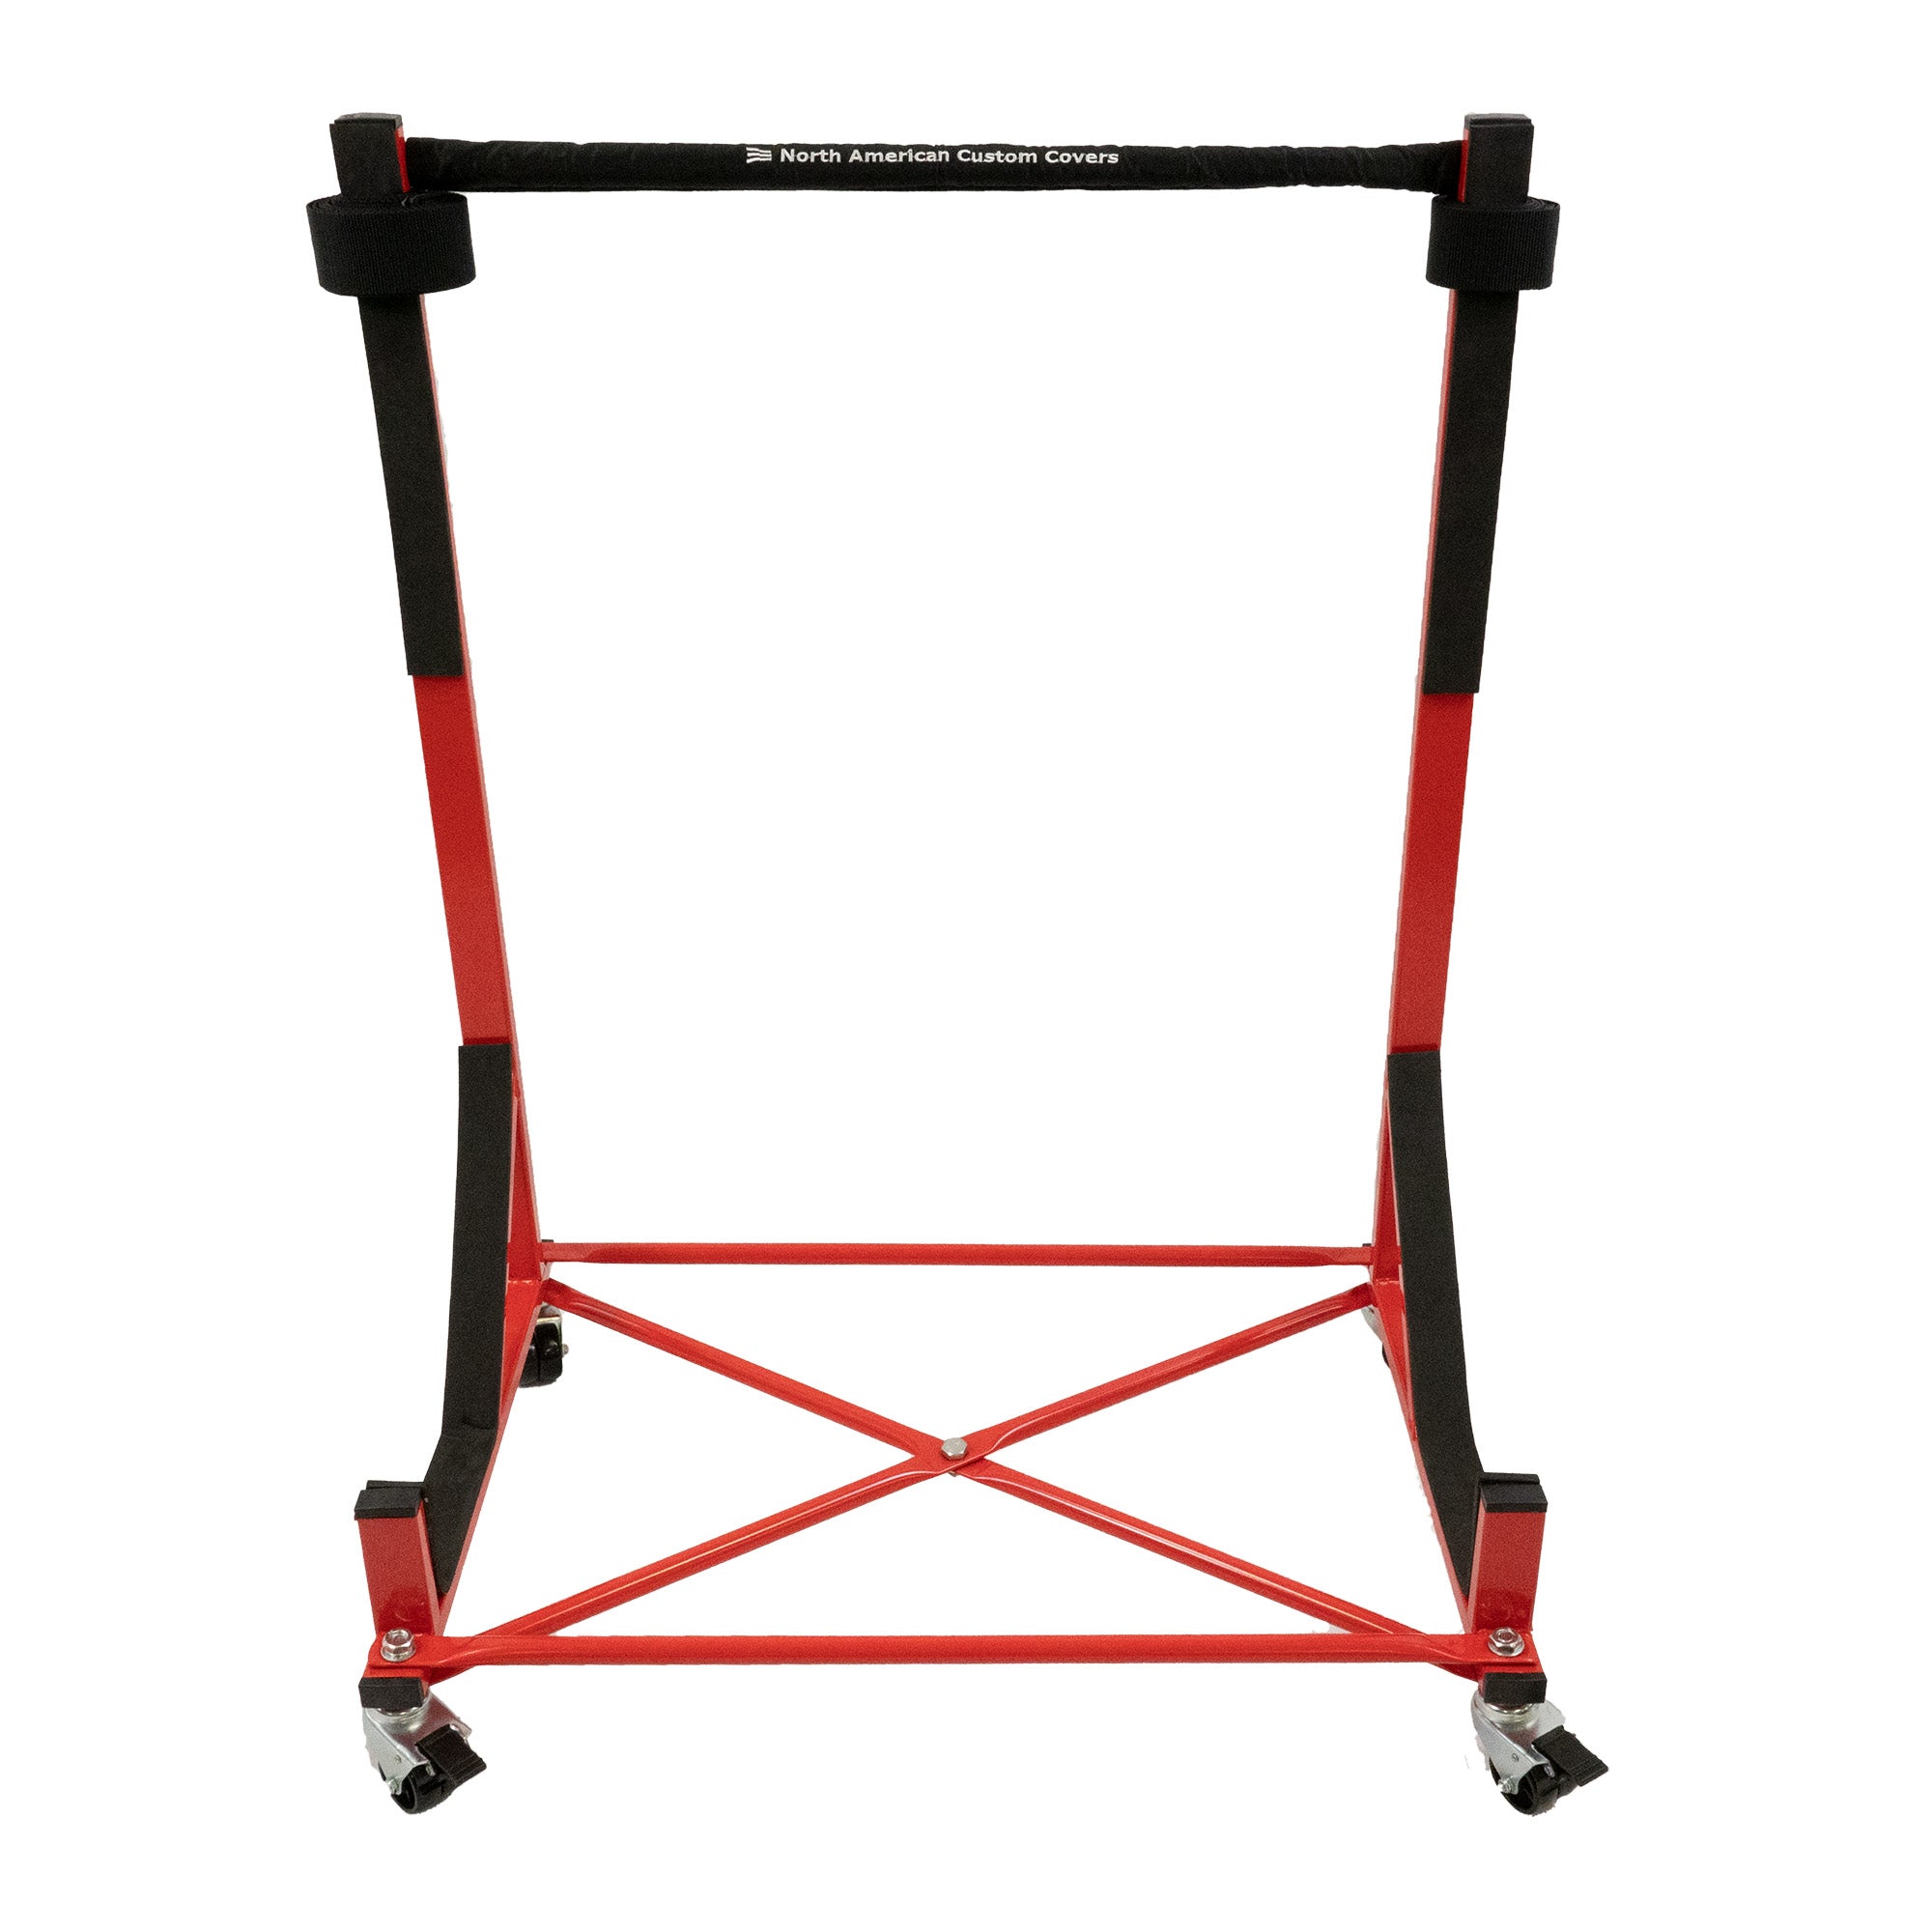 Triumph TR2 TR3 TR4 TR250 TR7 Heavy-duty Hardtop Stand Trolley Cart Rack (Red) with Securing Harness and Hard Top Dust Cover (050R)